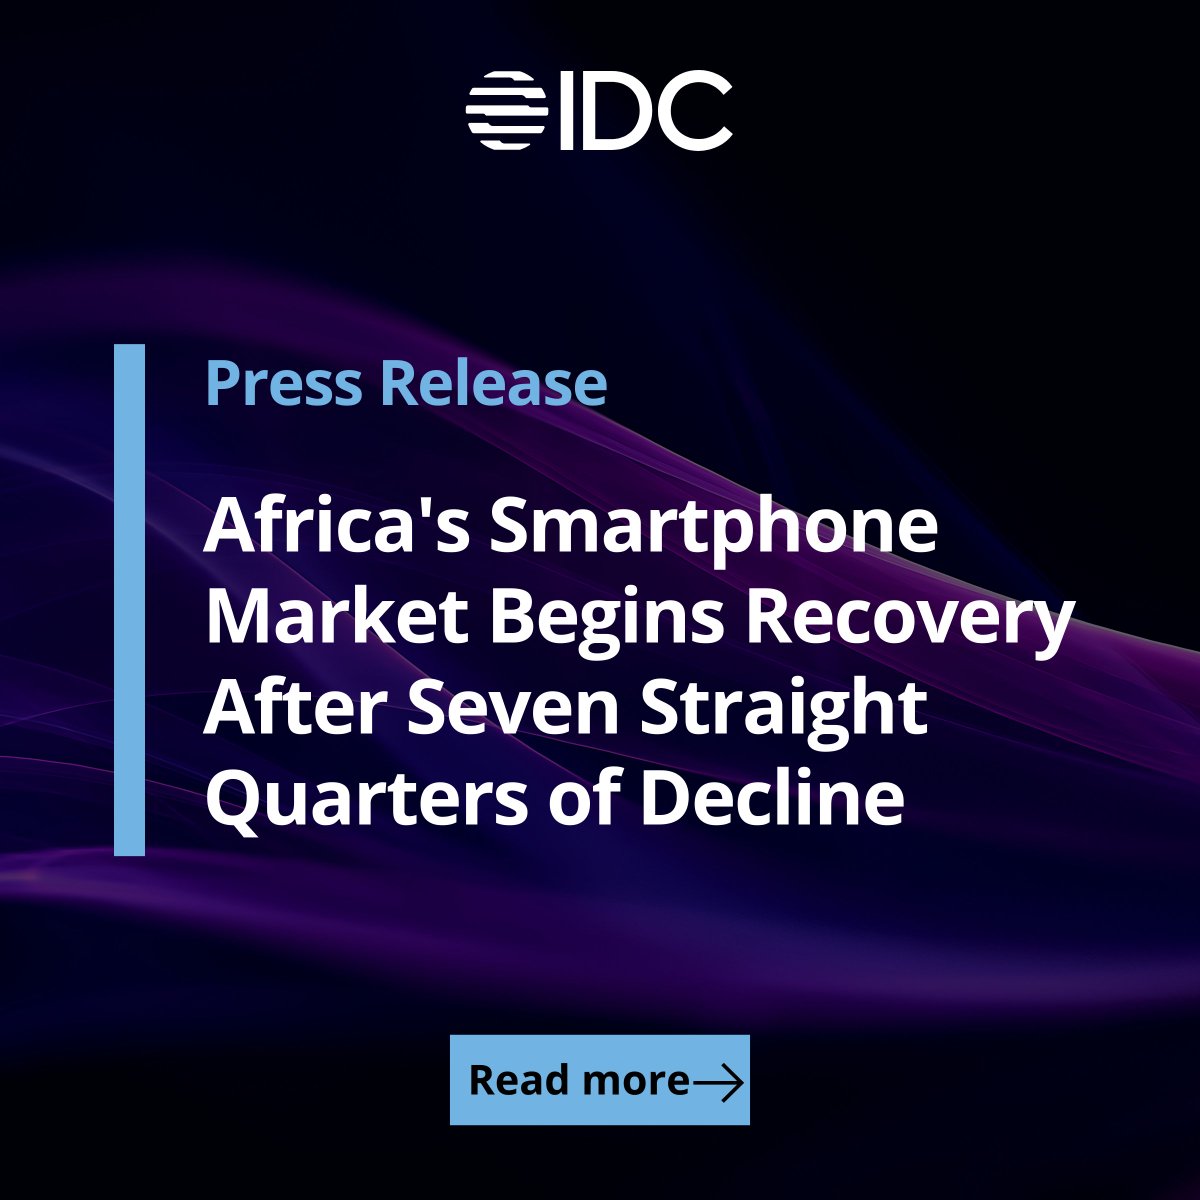 Great news from #Africa's #Smartphone Market! 🌍📱@IDC's data shows a 7.6% YoY growth in Q2 2023 smartphone shipments, totaling 19.6 million units—a recovery after seven quarters of decline. Read more: 2cm.es/uRAy #AfricaTech #IDCData